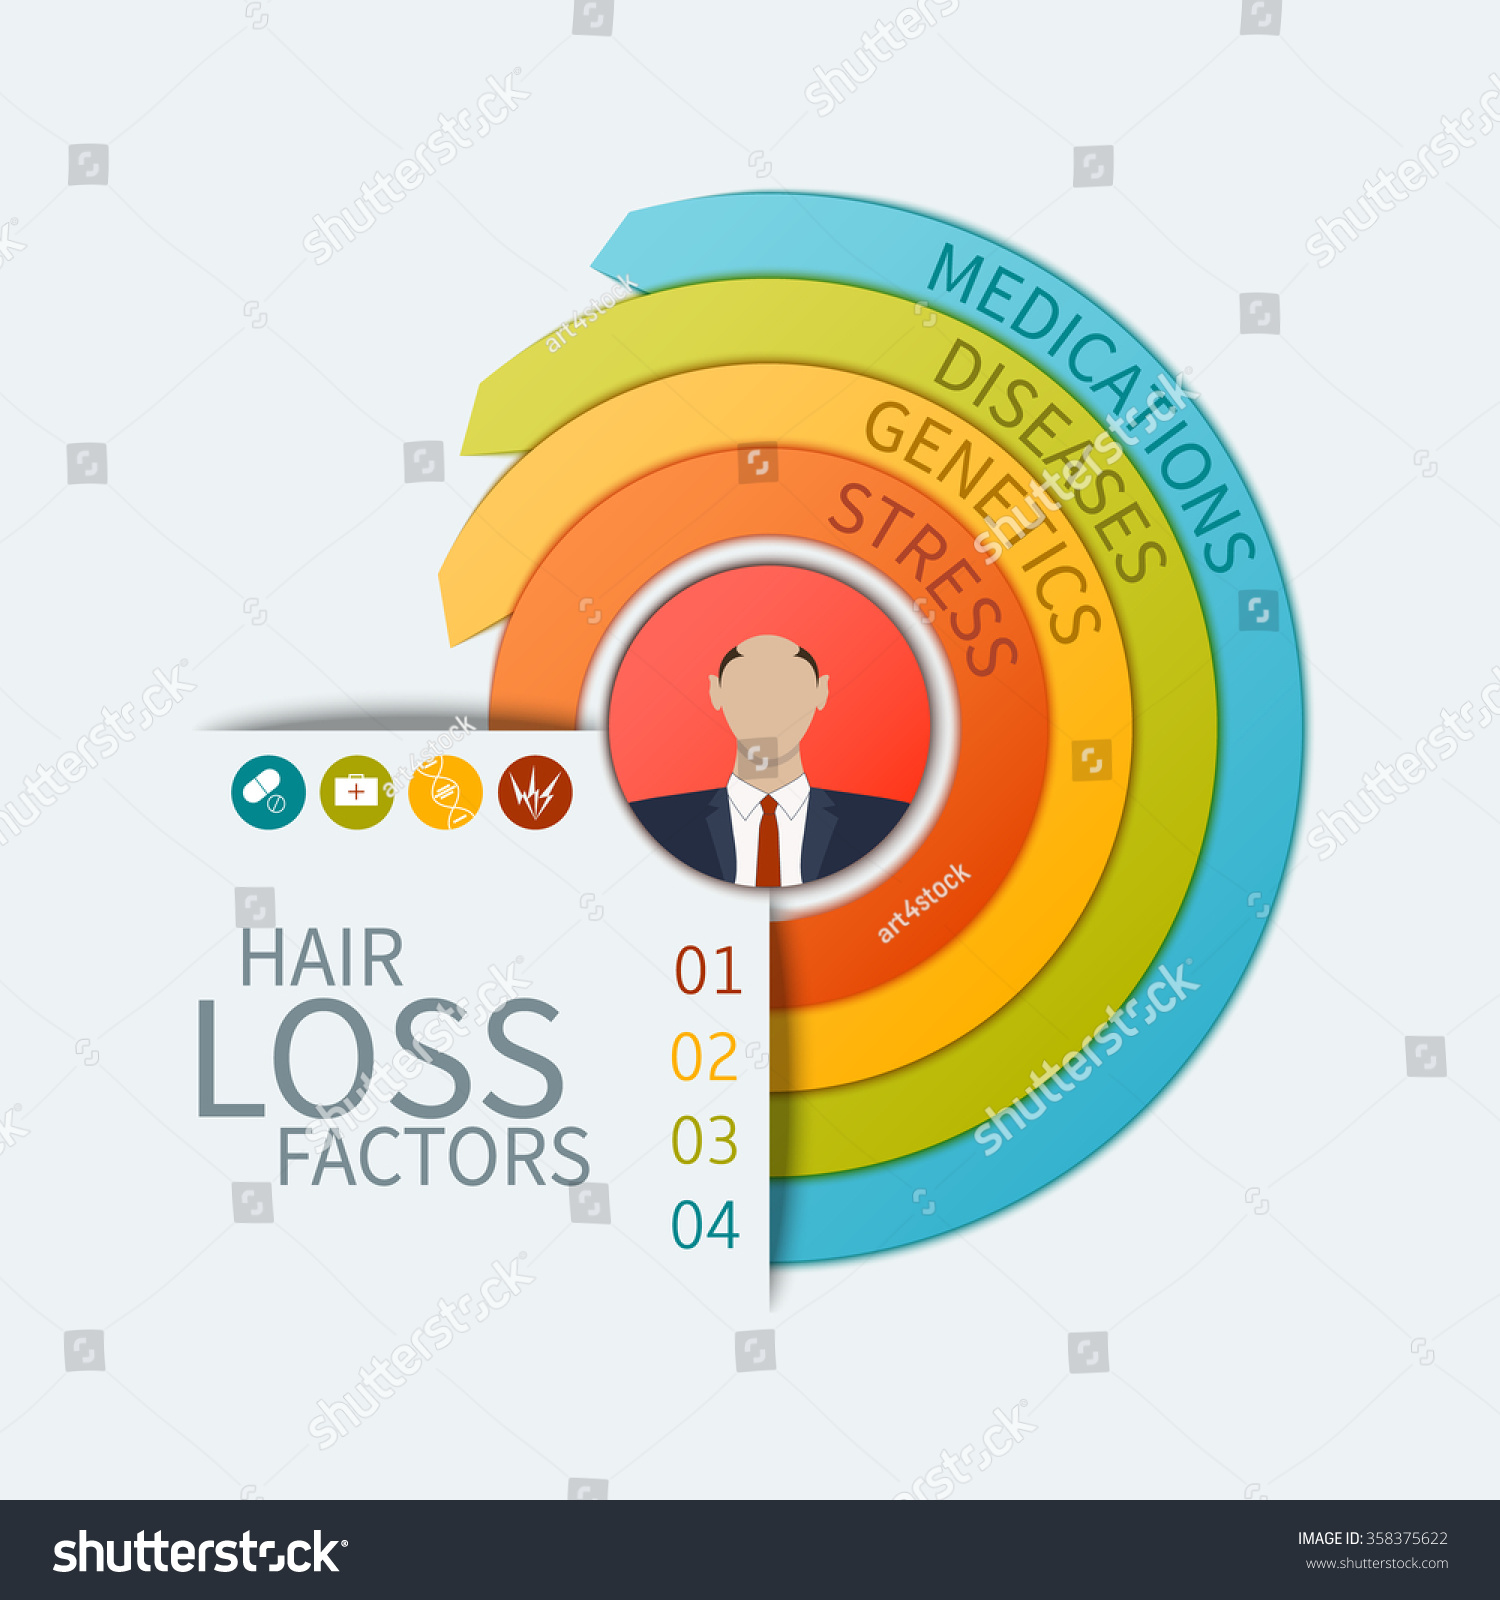 SVG of Hair loss infographic arrow business chart. Four baldness factors - stress, genetics, diseases and medications. Alopecia concept. Isolated vector illustration. svg